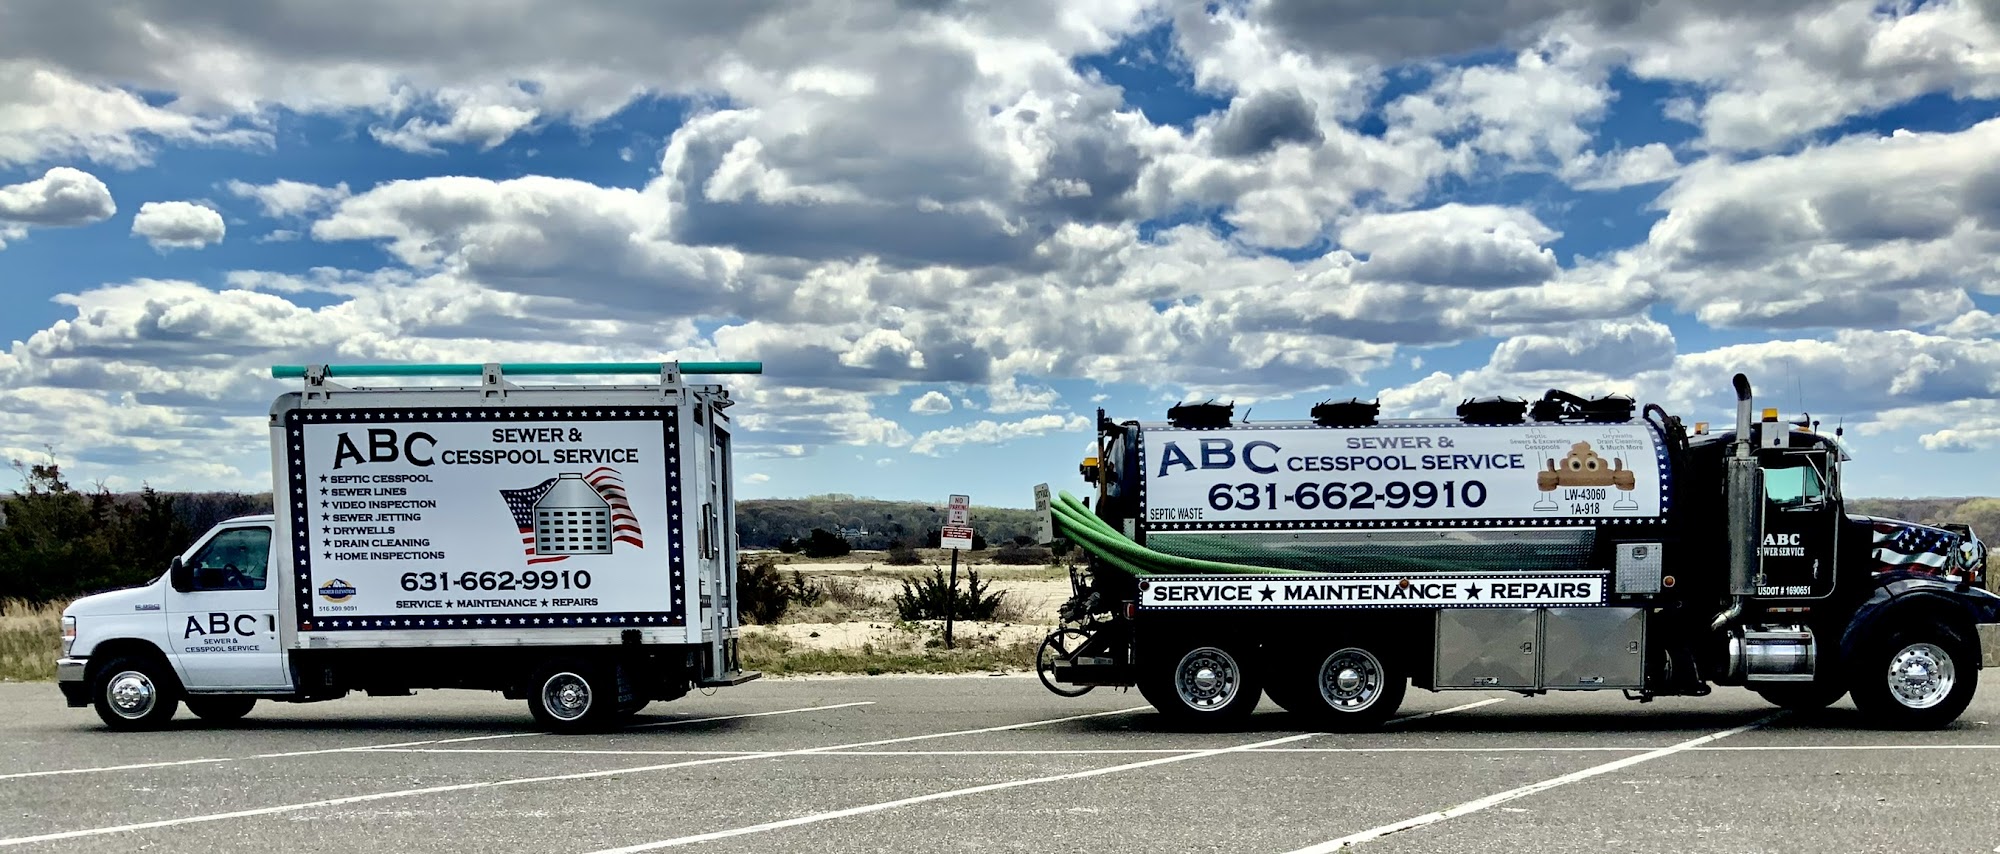 ABC Sewer Services Inc